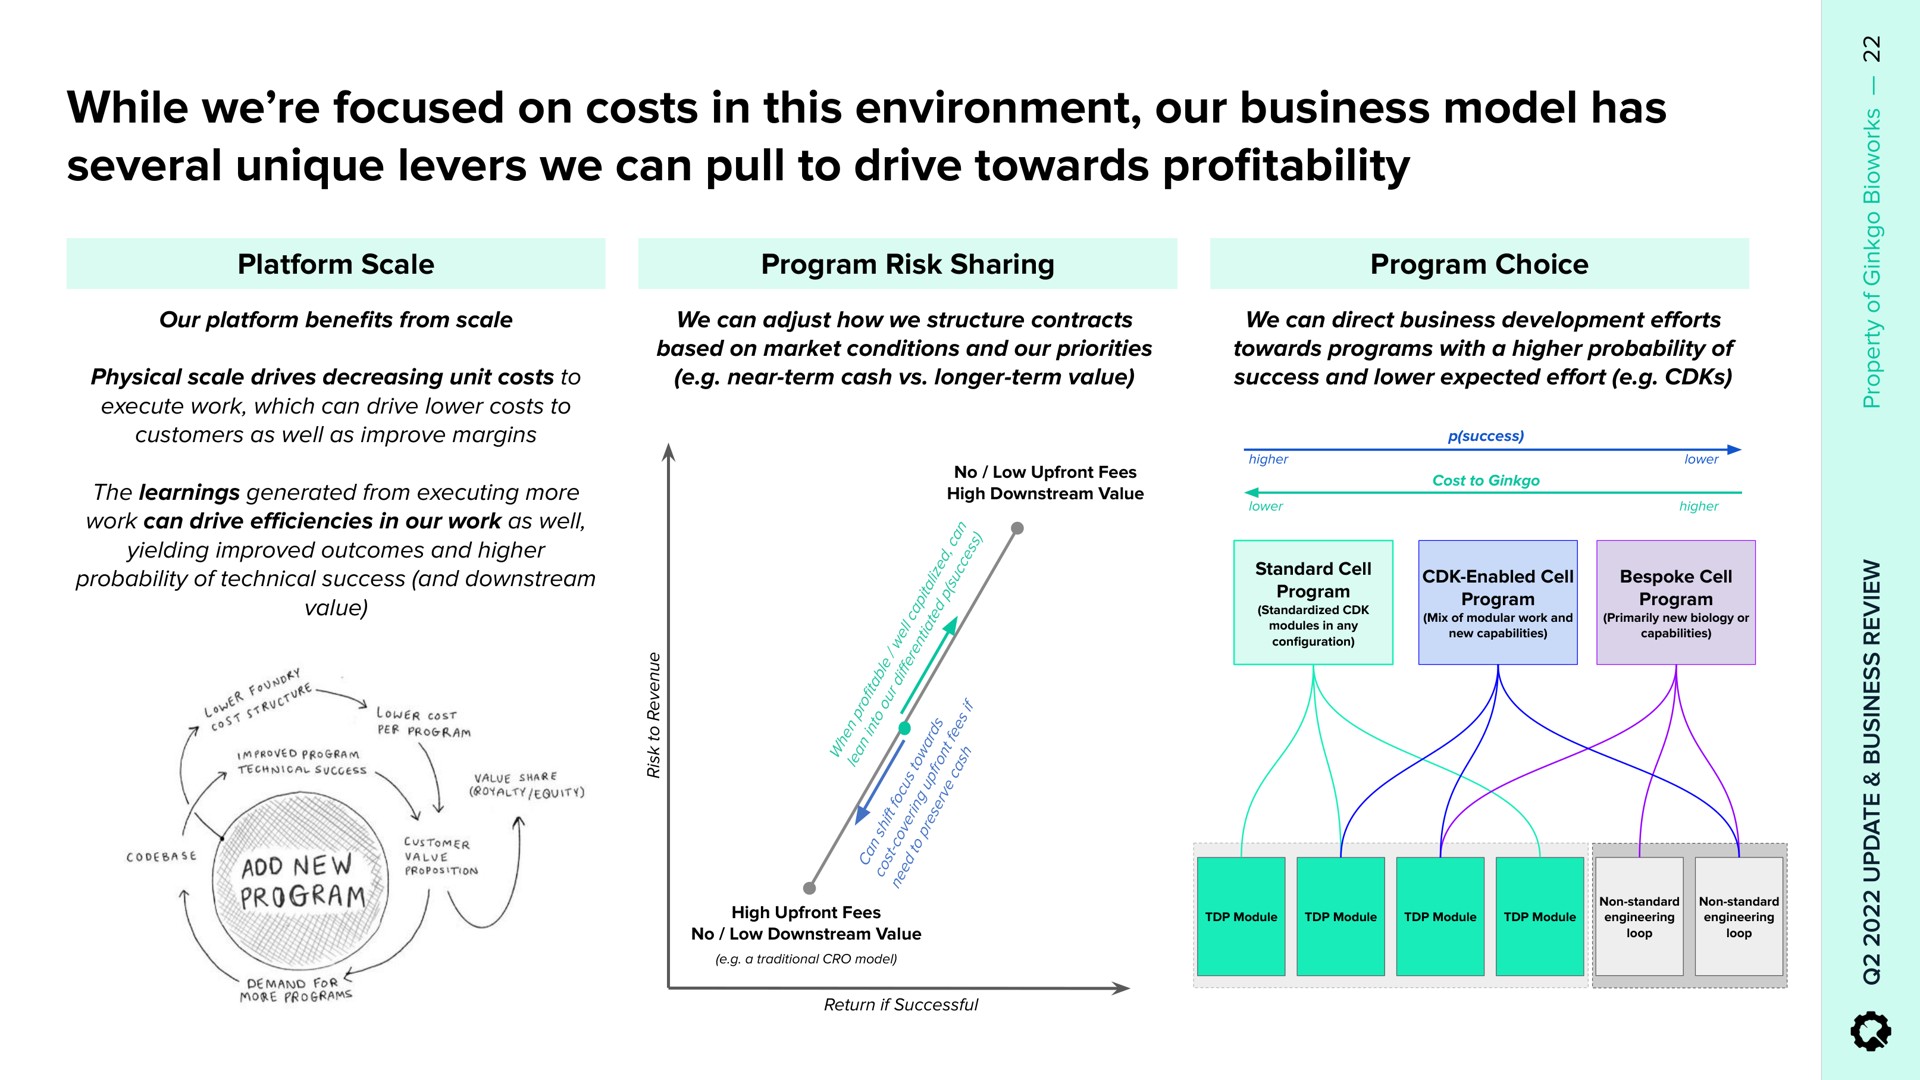 while we focused on costs in this environment our business model has several unique levers we can pull to drive towards pro profitability | Ginkgo